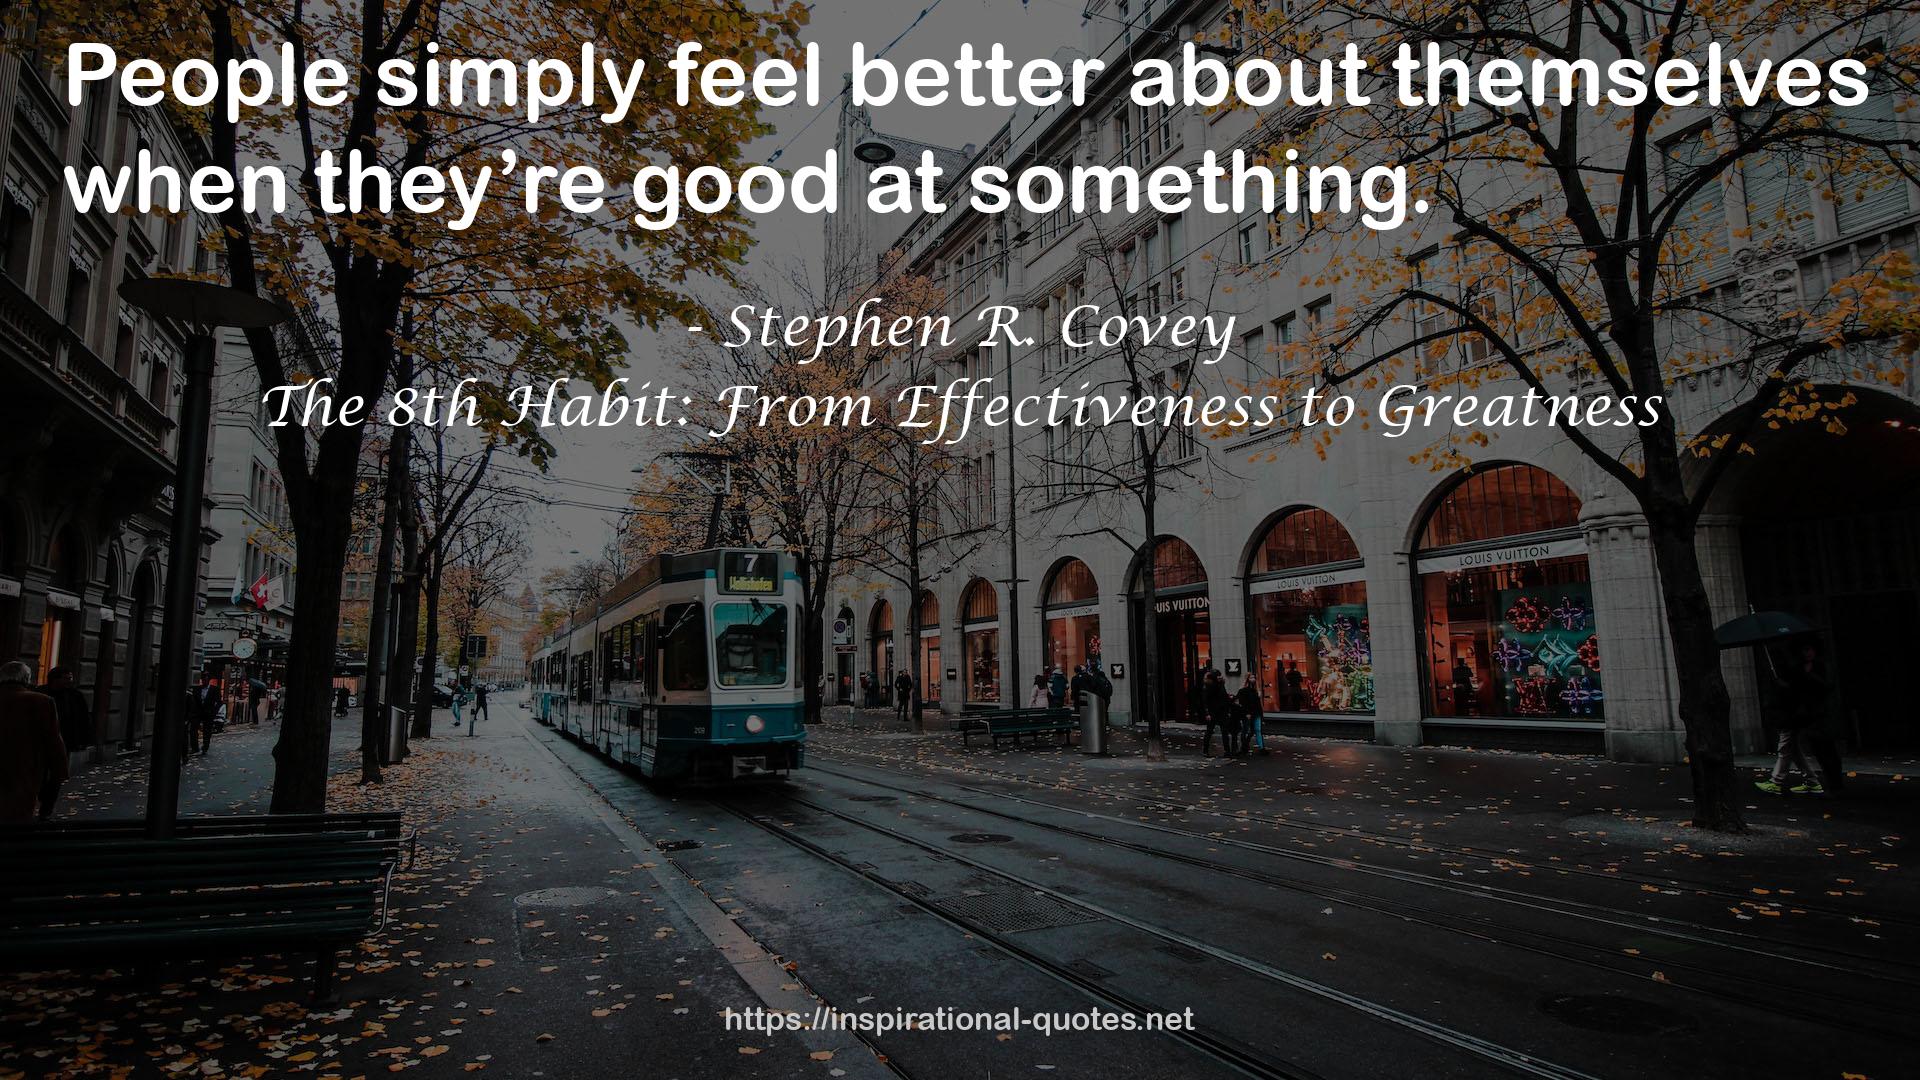 The 8th Habit: From Effectiveness to Greatness QUOTES